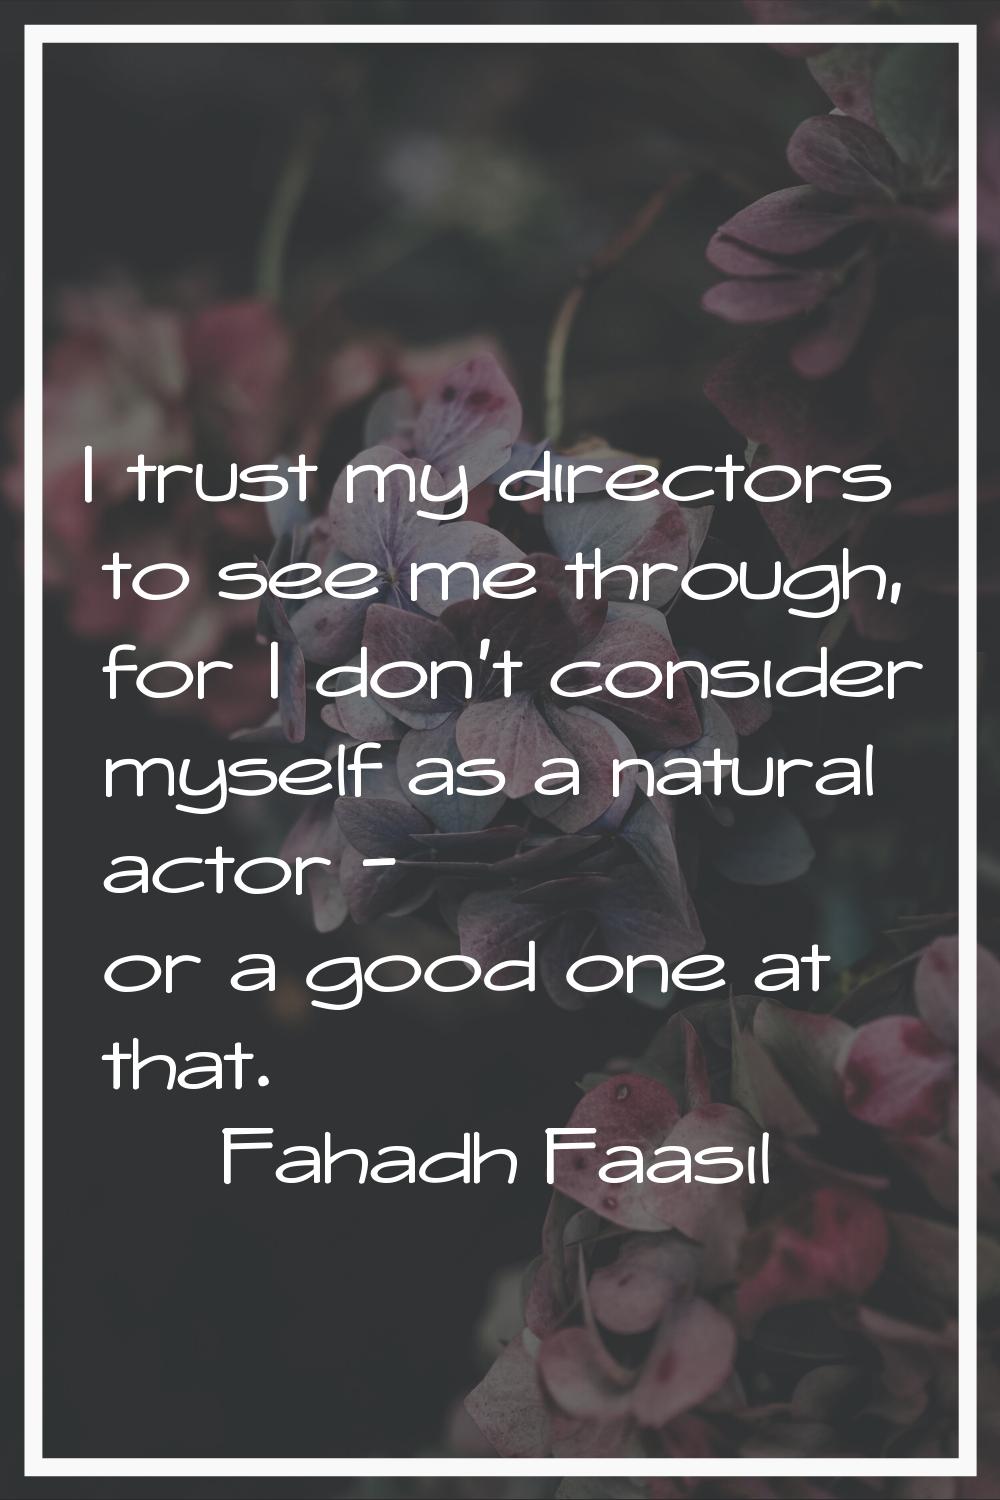 I trust my directors to see me through, for I don't consider myself as a natural actor - or a good 